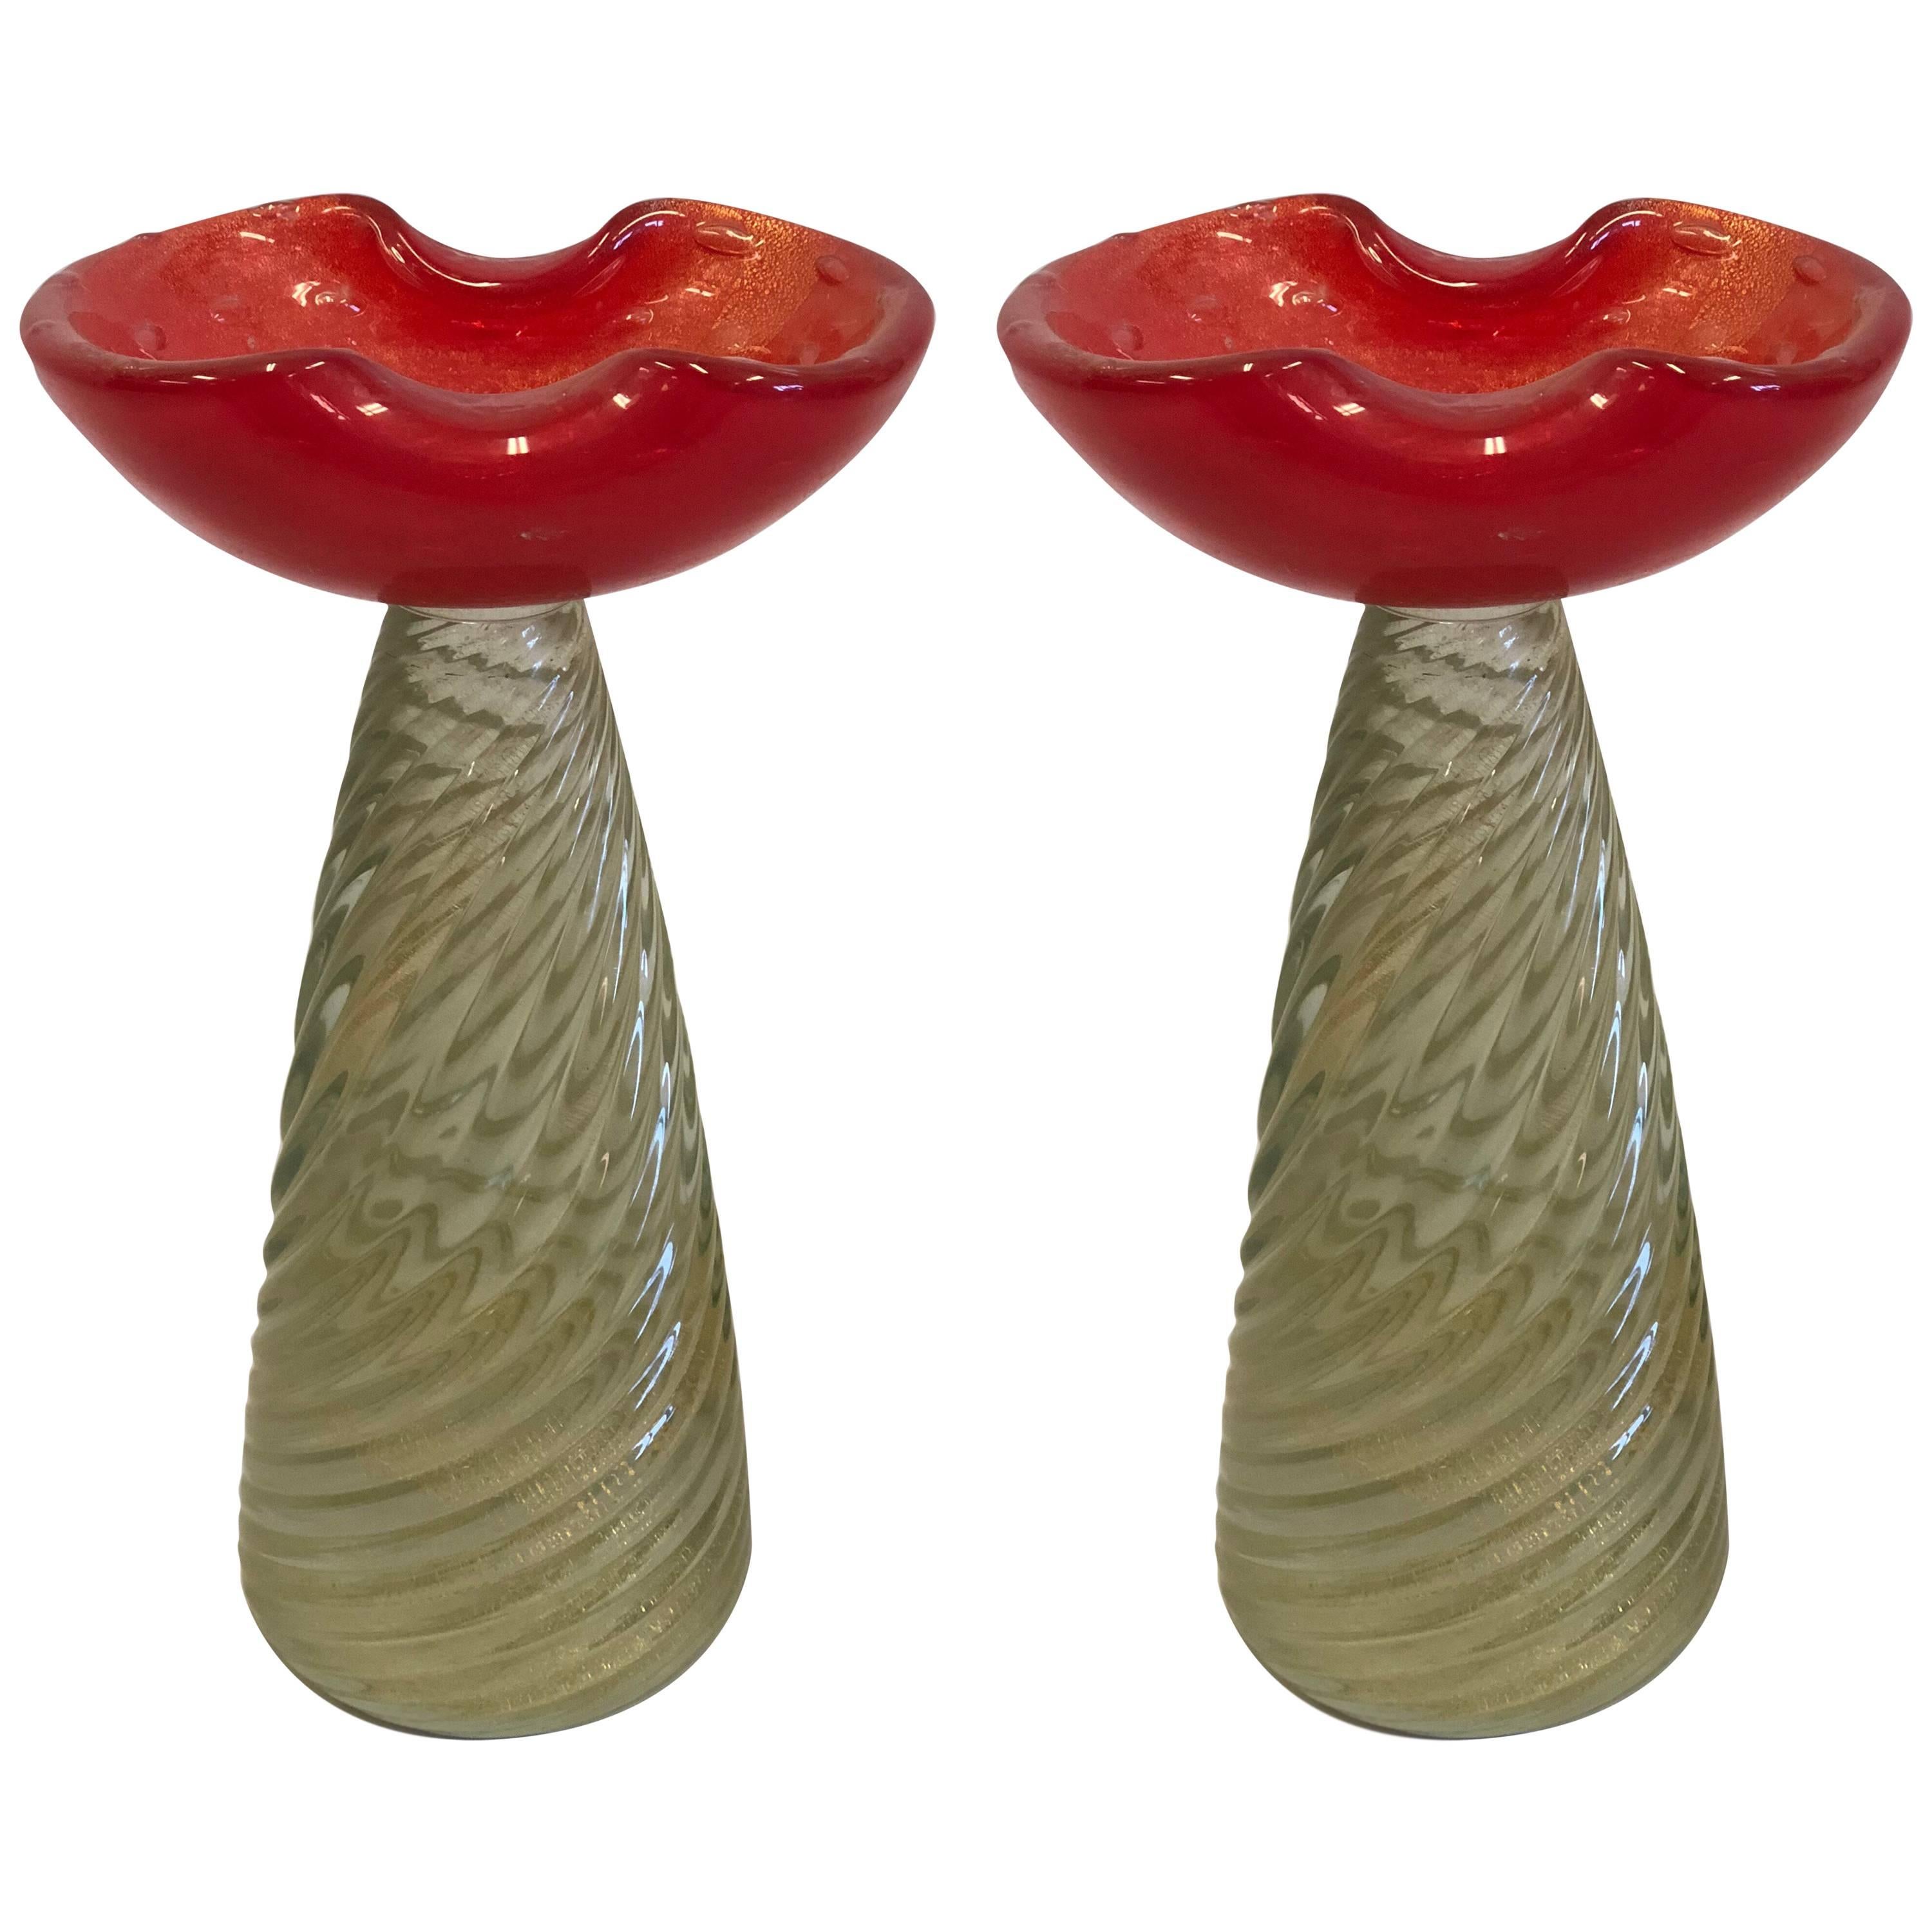 Pair of Mid-Century Modern Murano / Venetian Glass Candlestick or Candelabra For Sale